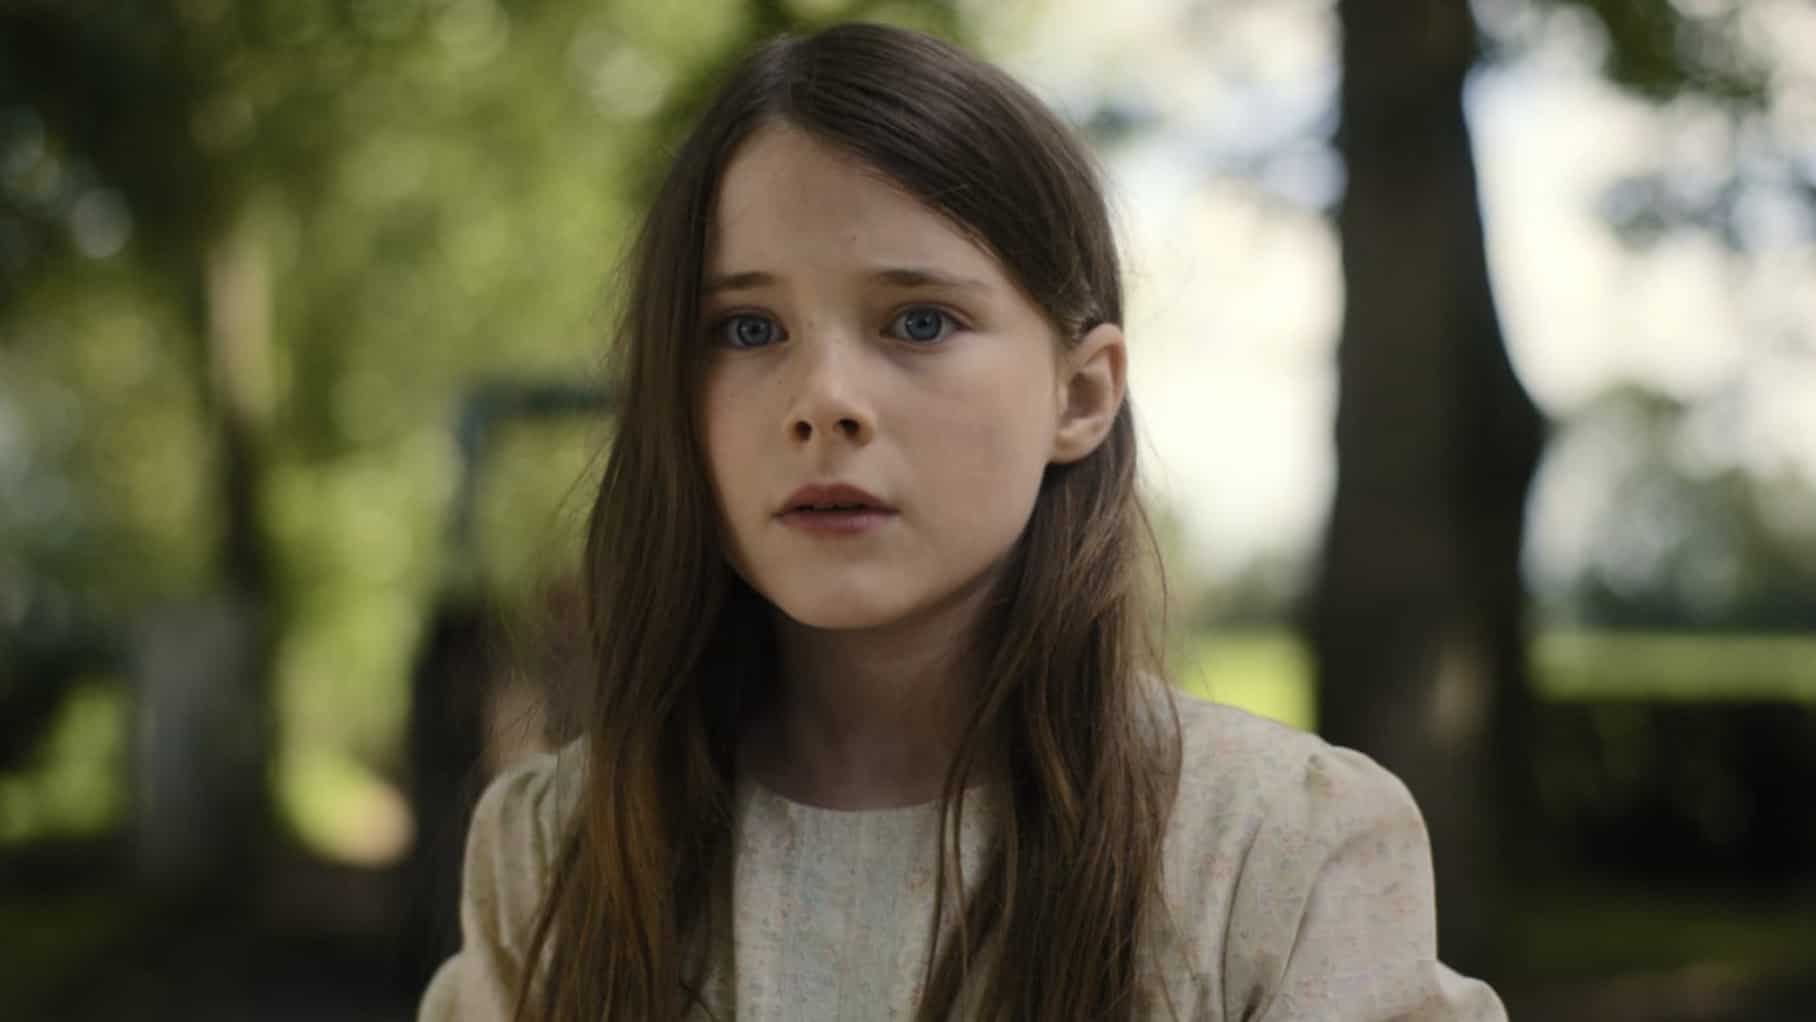 Images Cinema persents the The Quiet Girl, the acclaimed Irish drama nominated for an Oscar for Best International Feature Film.